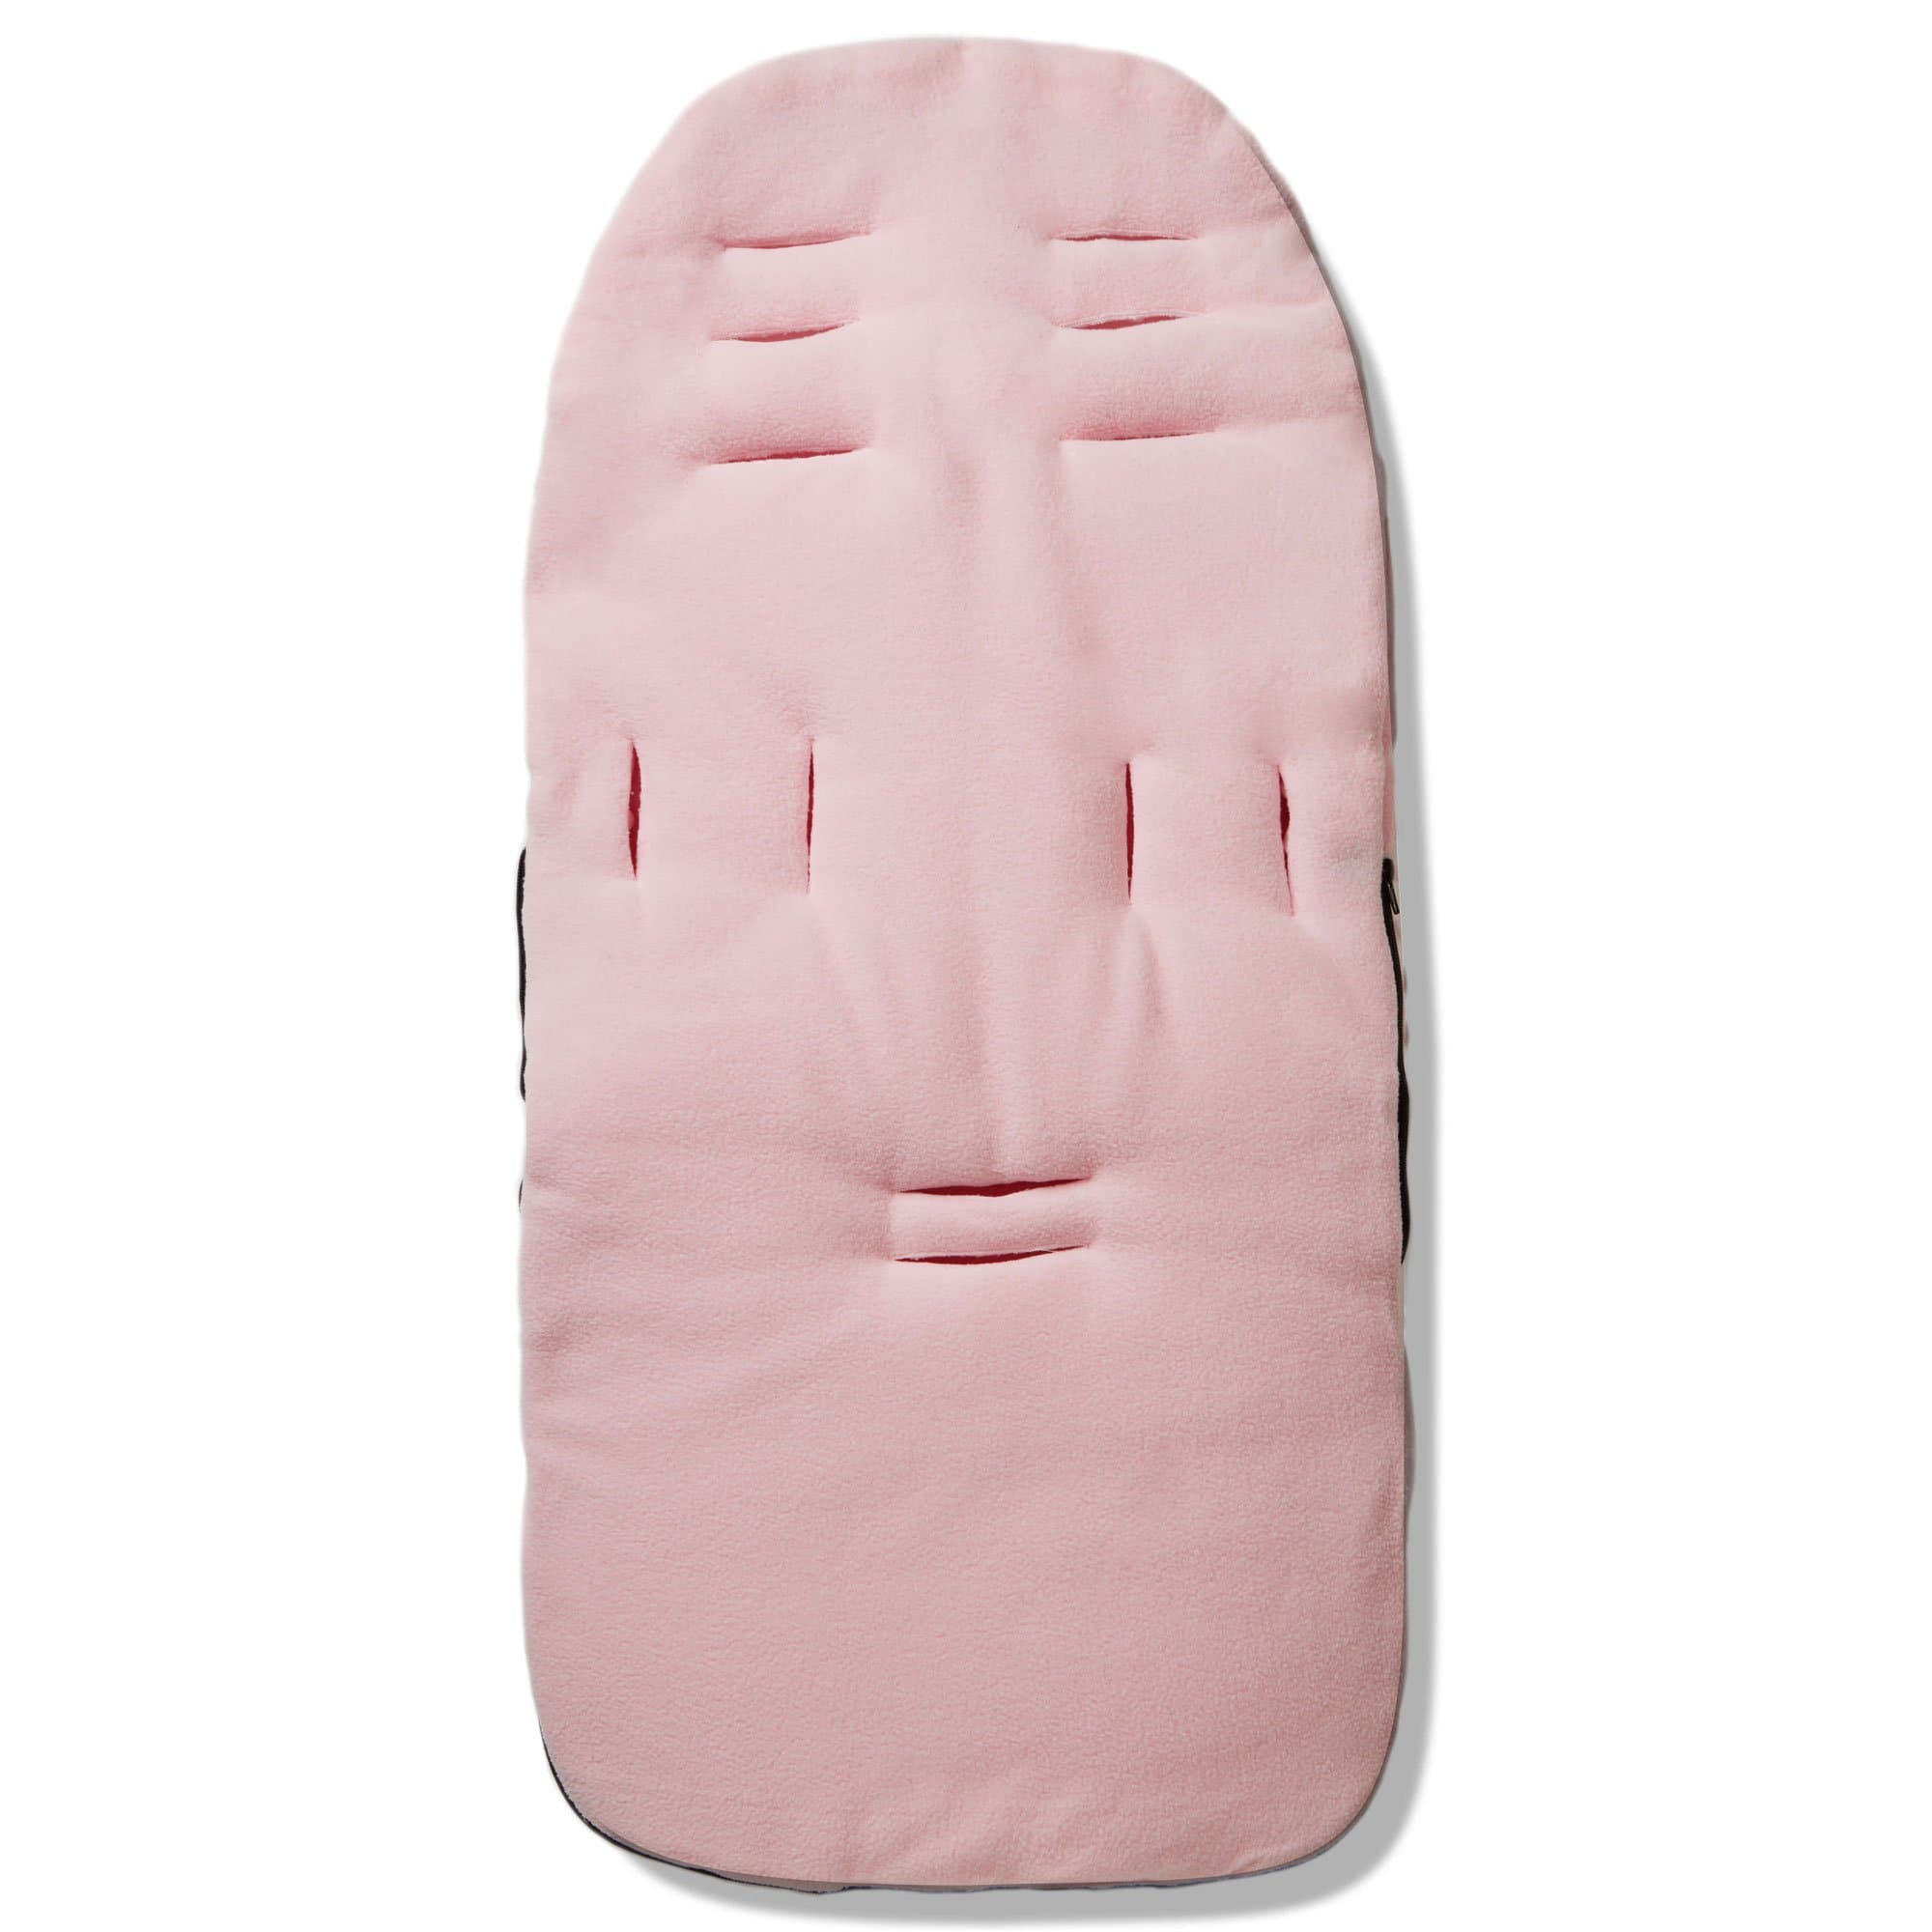 Dimple Footmuff / Cosy Toes Compatible with Cosatto - For Your Little One